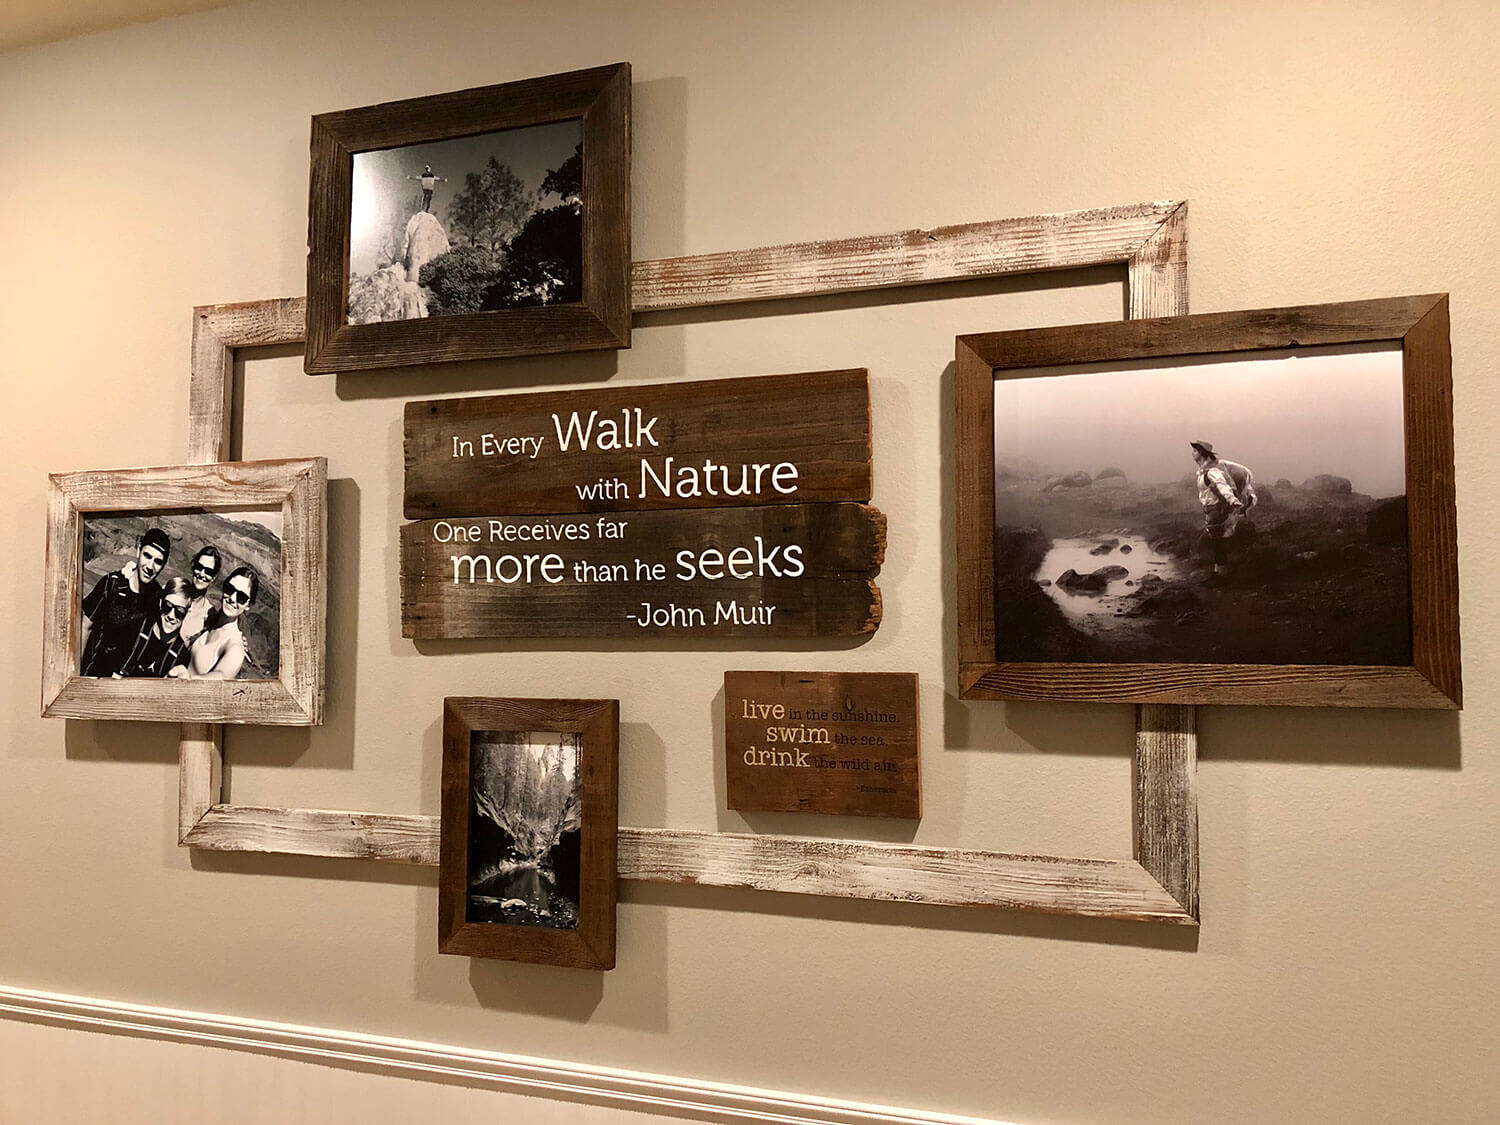 Custom rustic wood signs making up a collage with rustic framed photos and hand-painted quote signs for a vintage-inspired home décor by Urban Garden Studio.